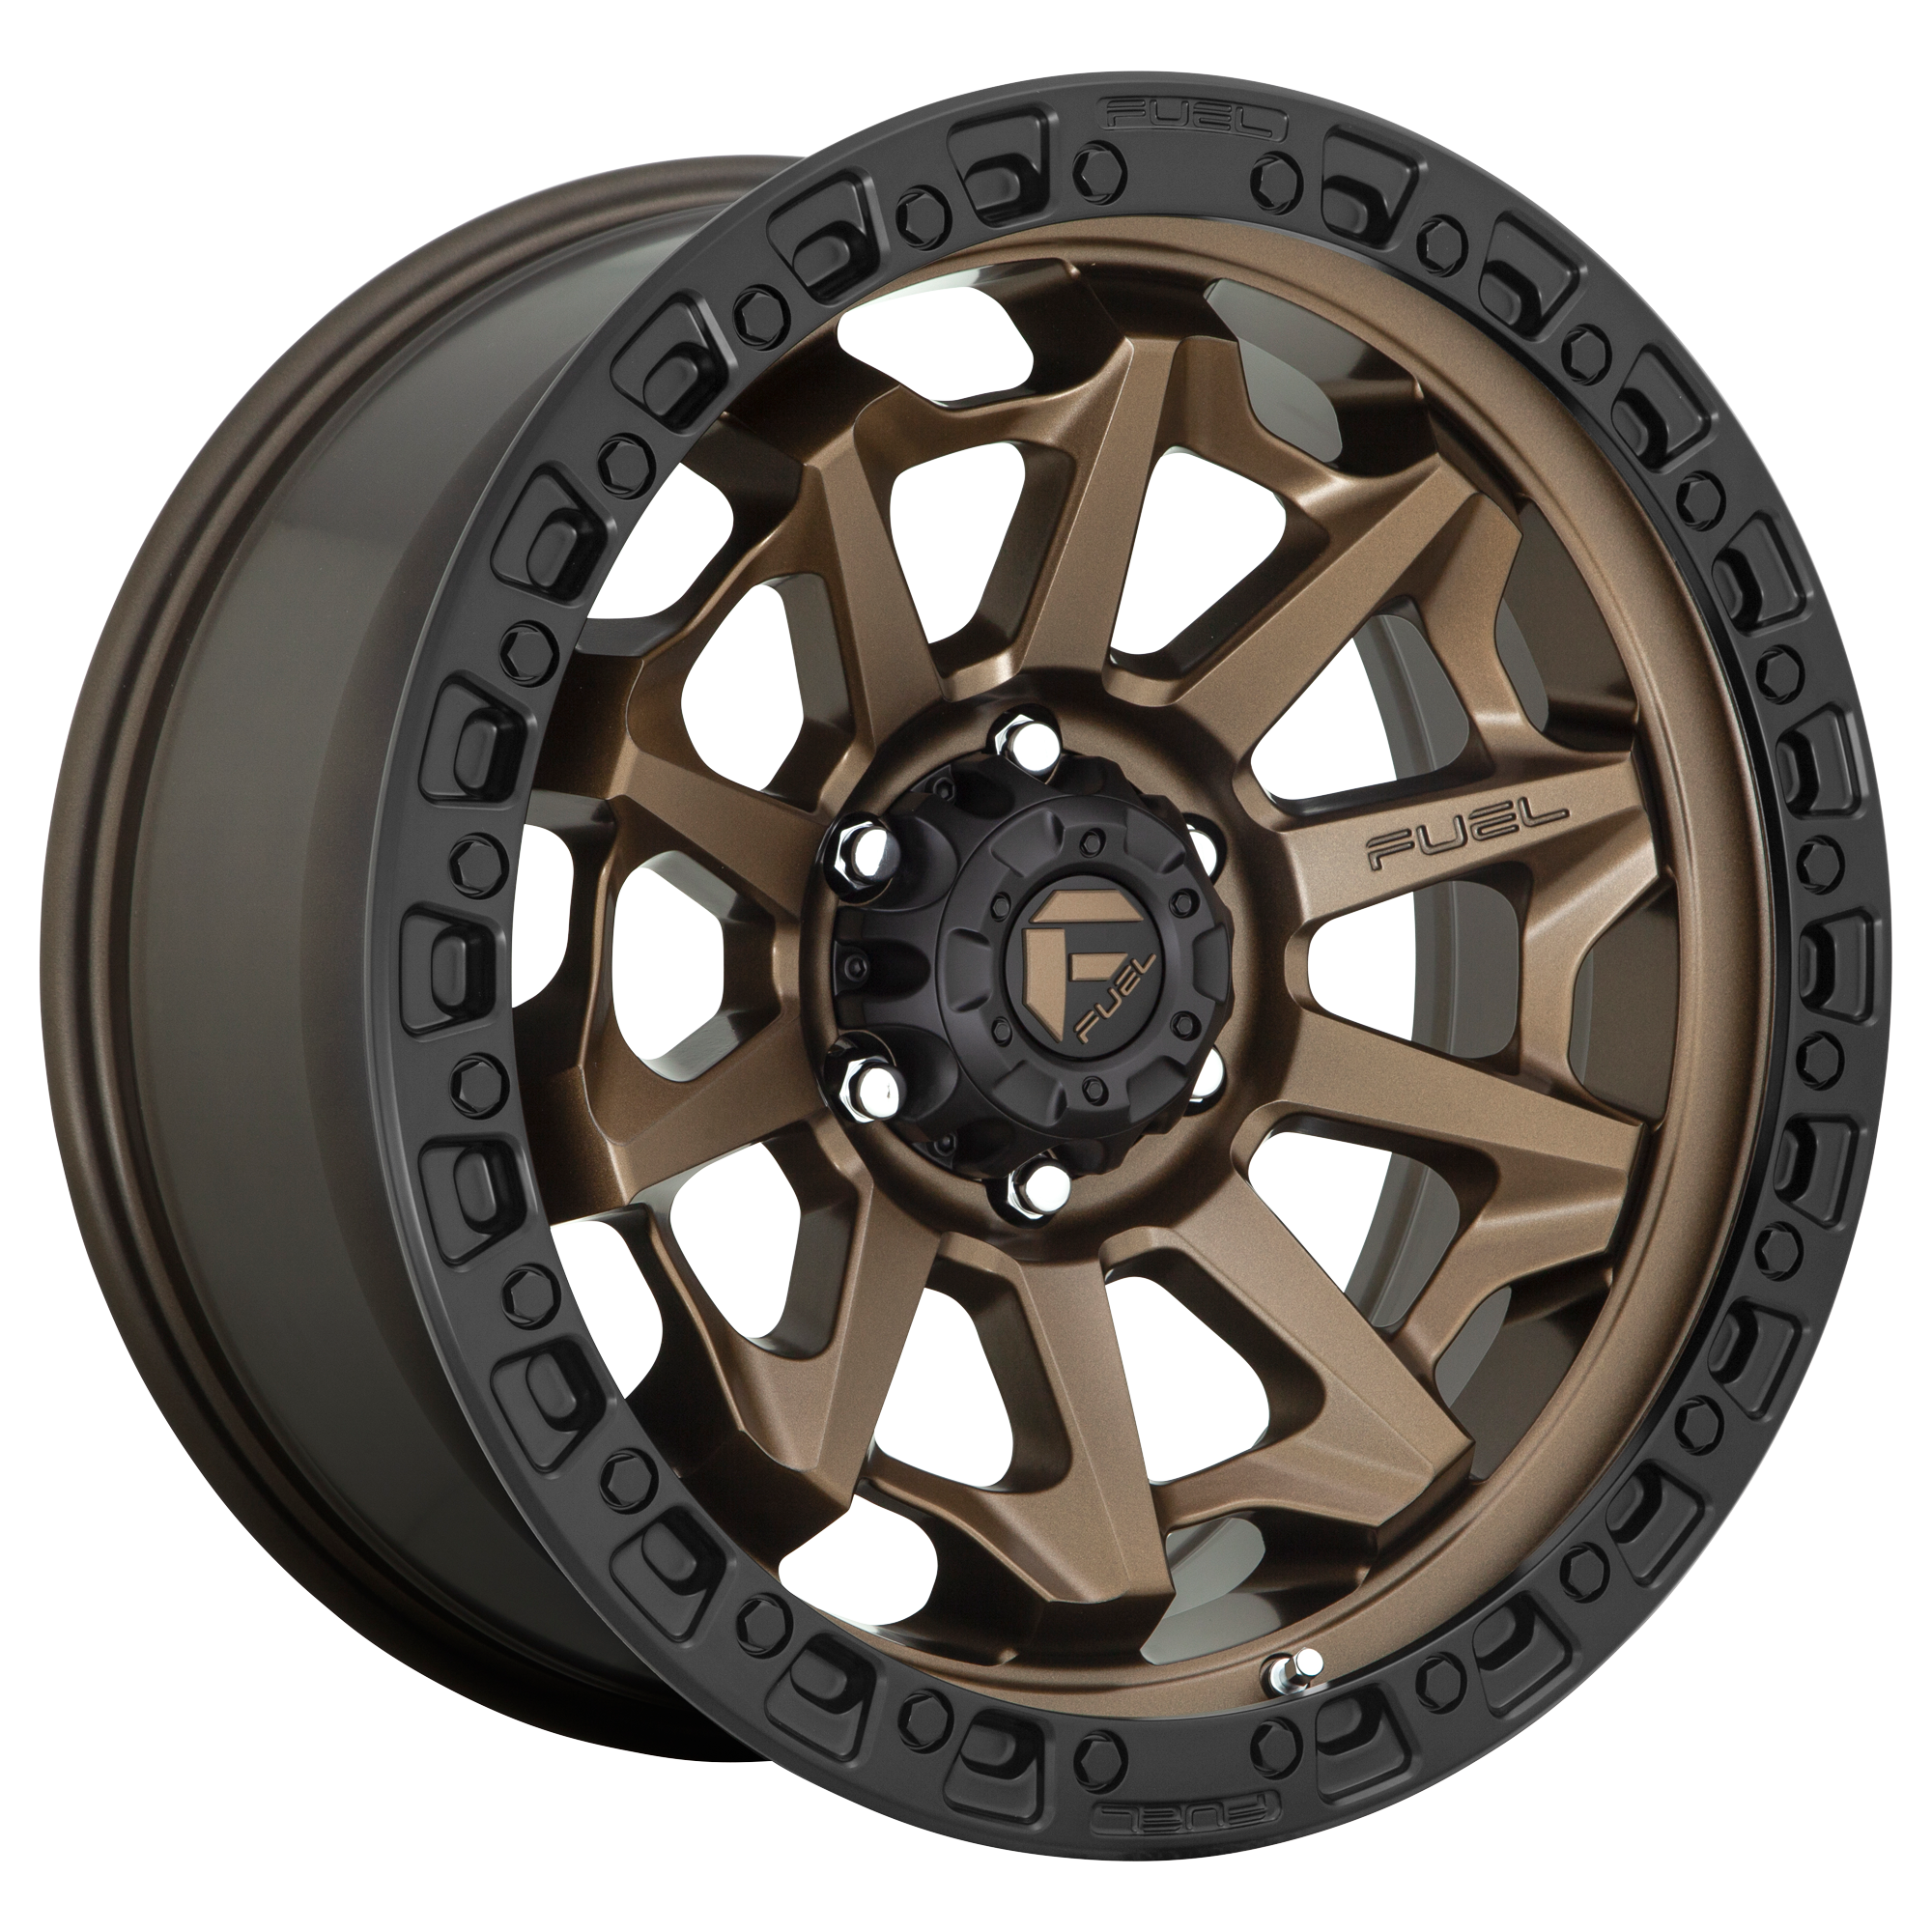 COVERT 20x10 8x170.00 MATTE BRONZE BLACK BEAD RING (-18 mm) - Tires and Engine Performance